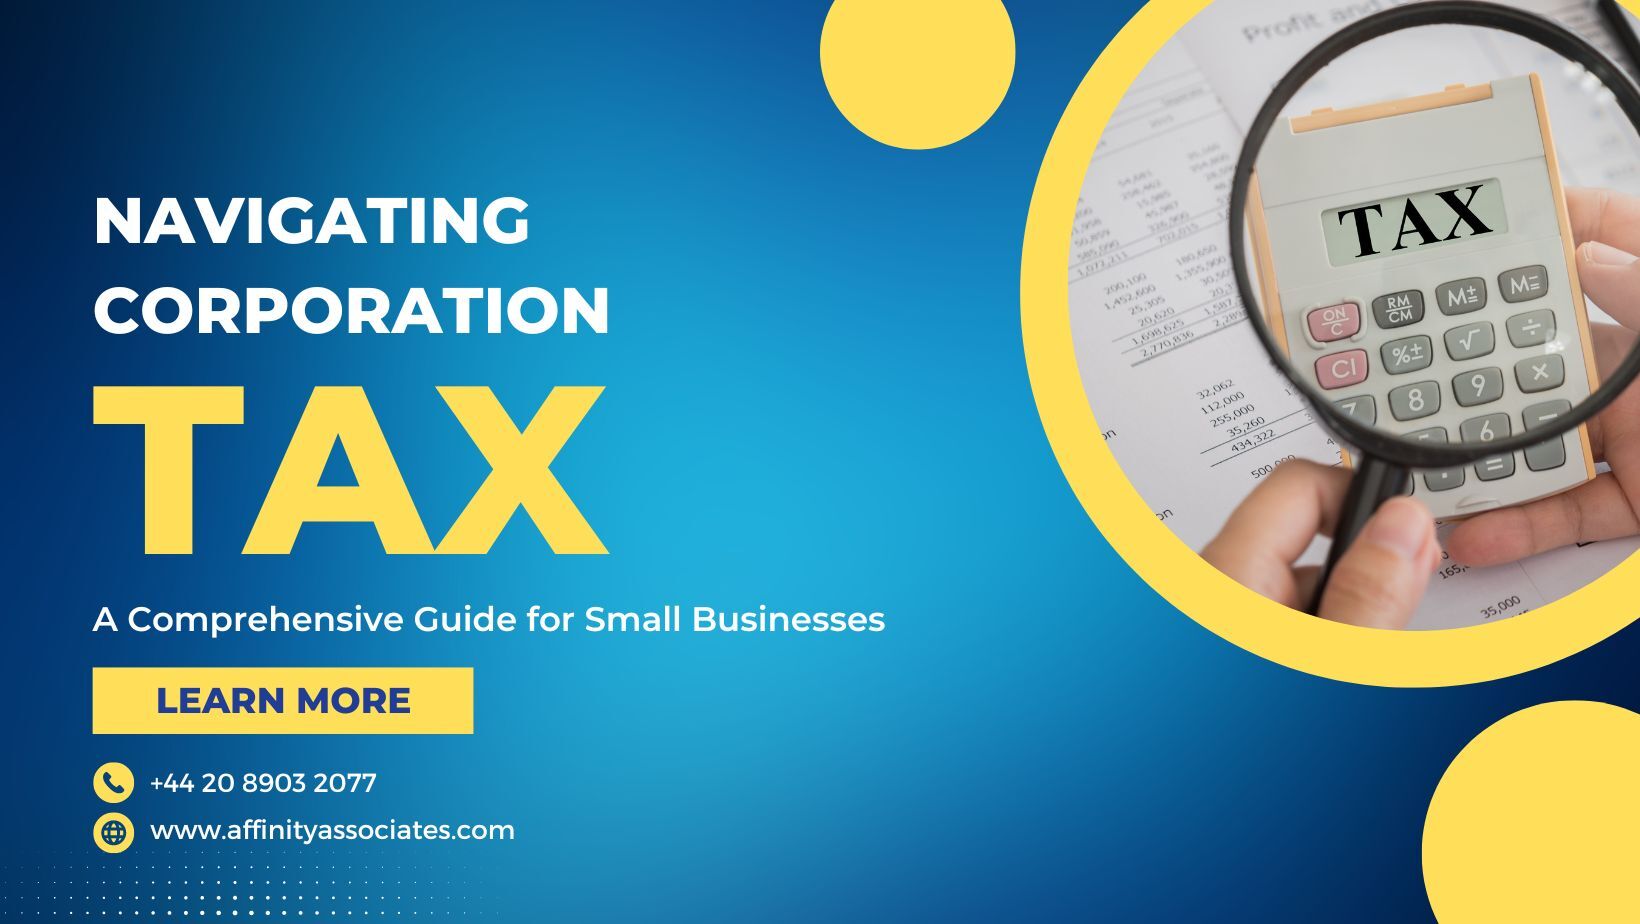 Navigating Corporation Tax: A Comprehensive Guide for Small Businesses